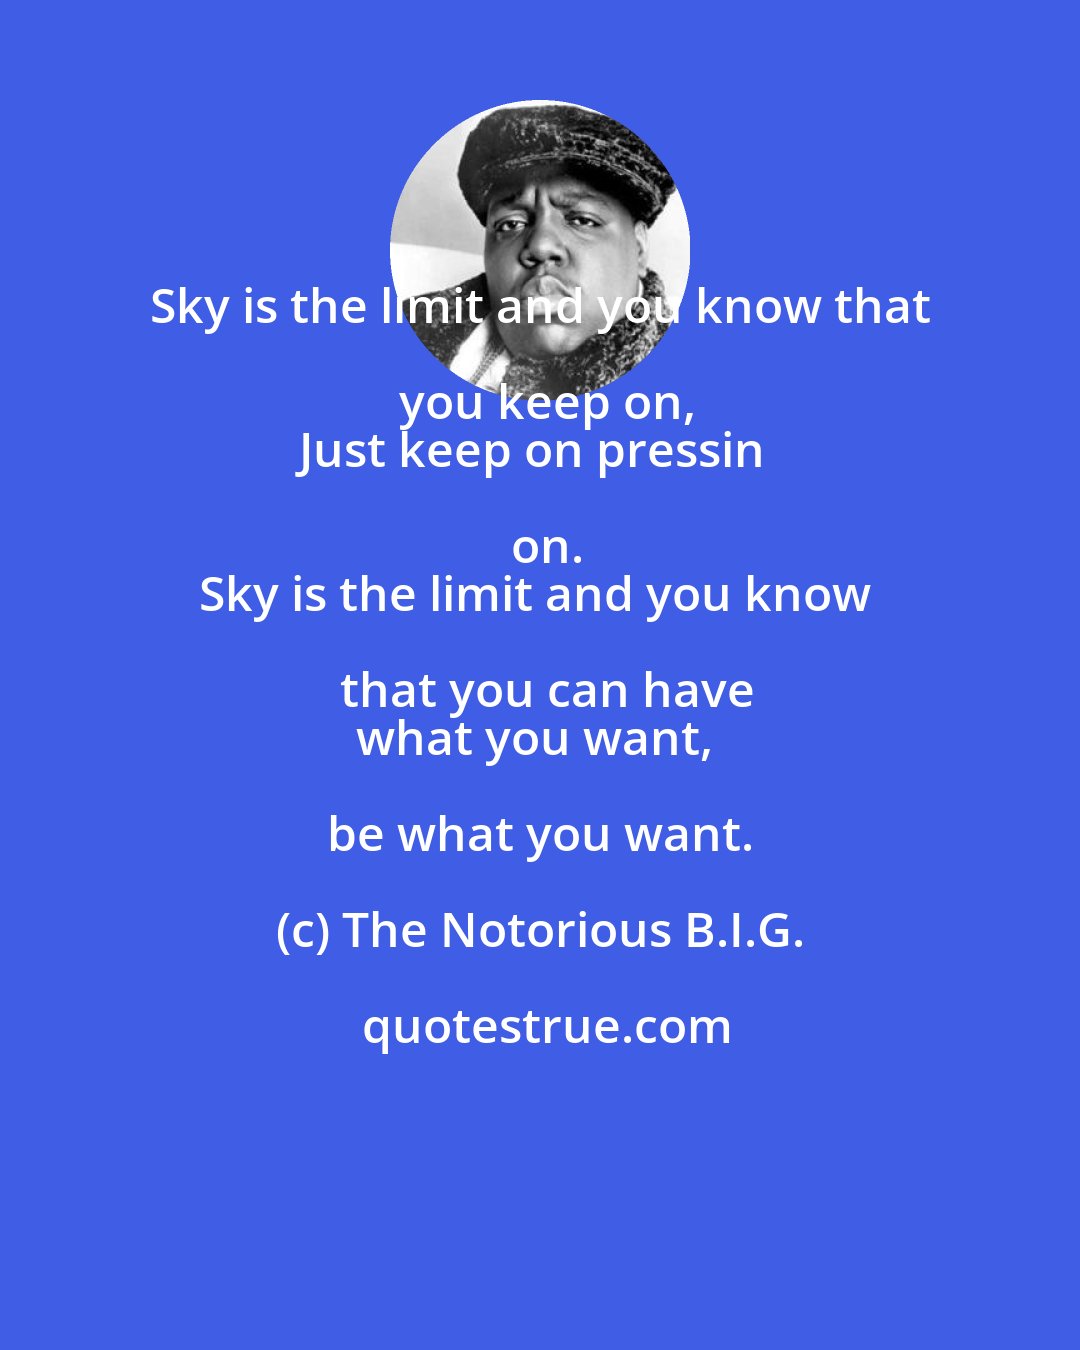 The Notorious B.I.G.: Sky is the limit and you know that you keep on,
Just keep on pressin on.
Sky is the limit and you know that you can have
what you want, be what you want.